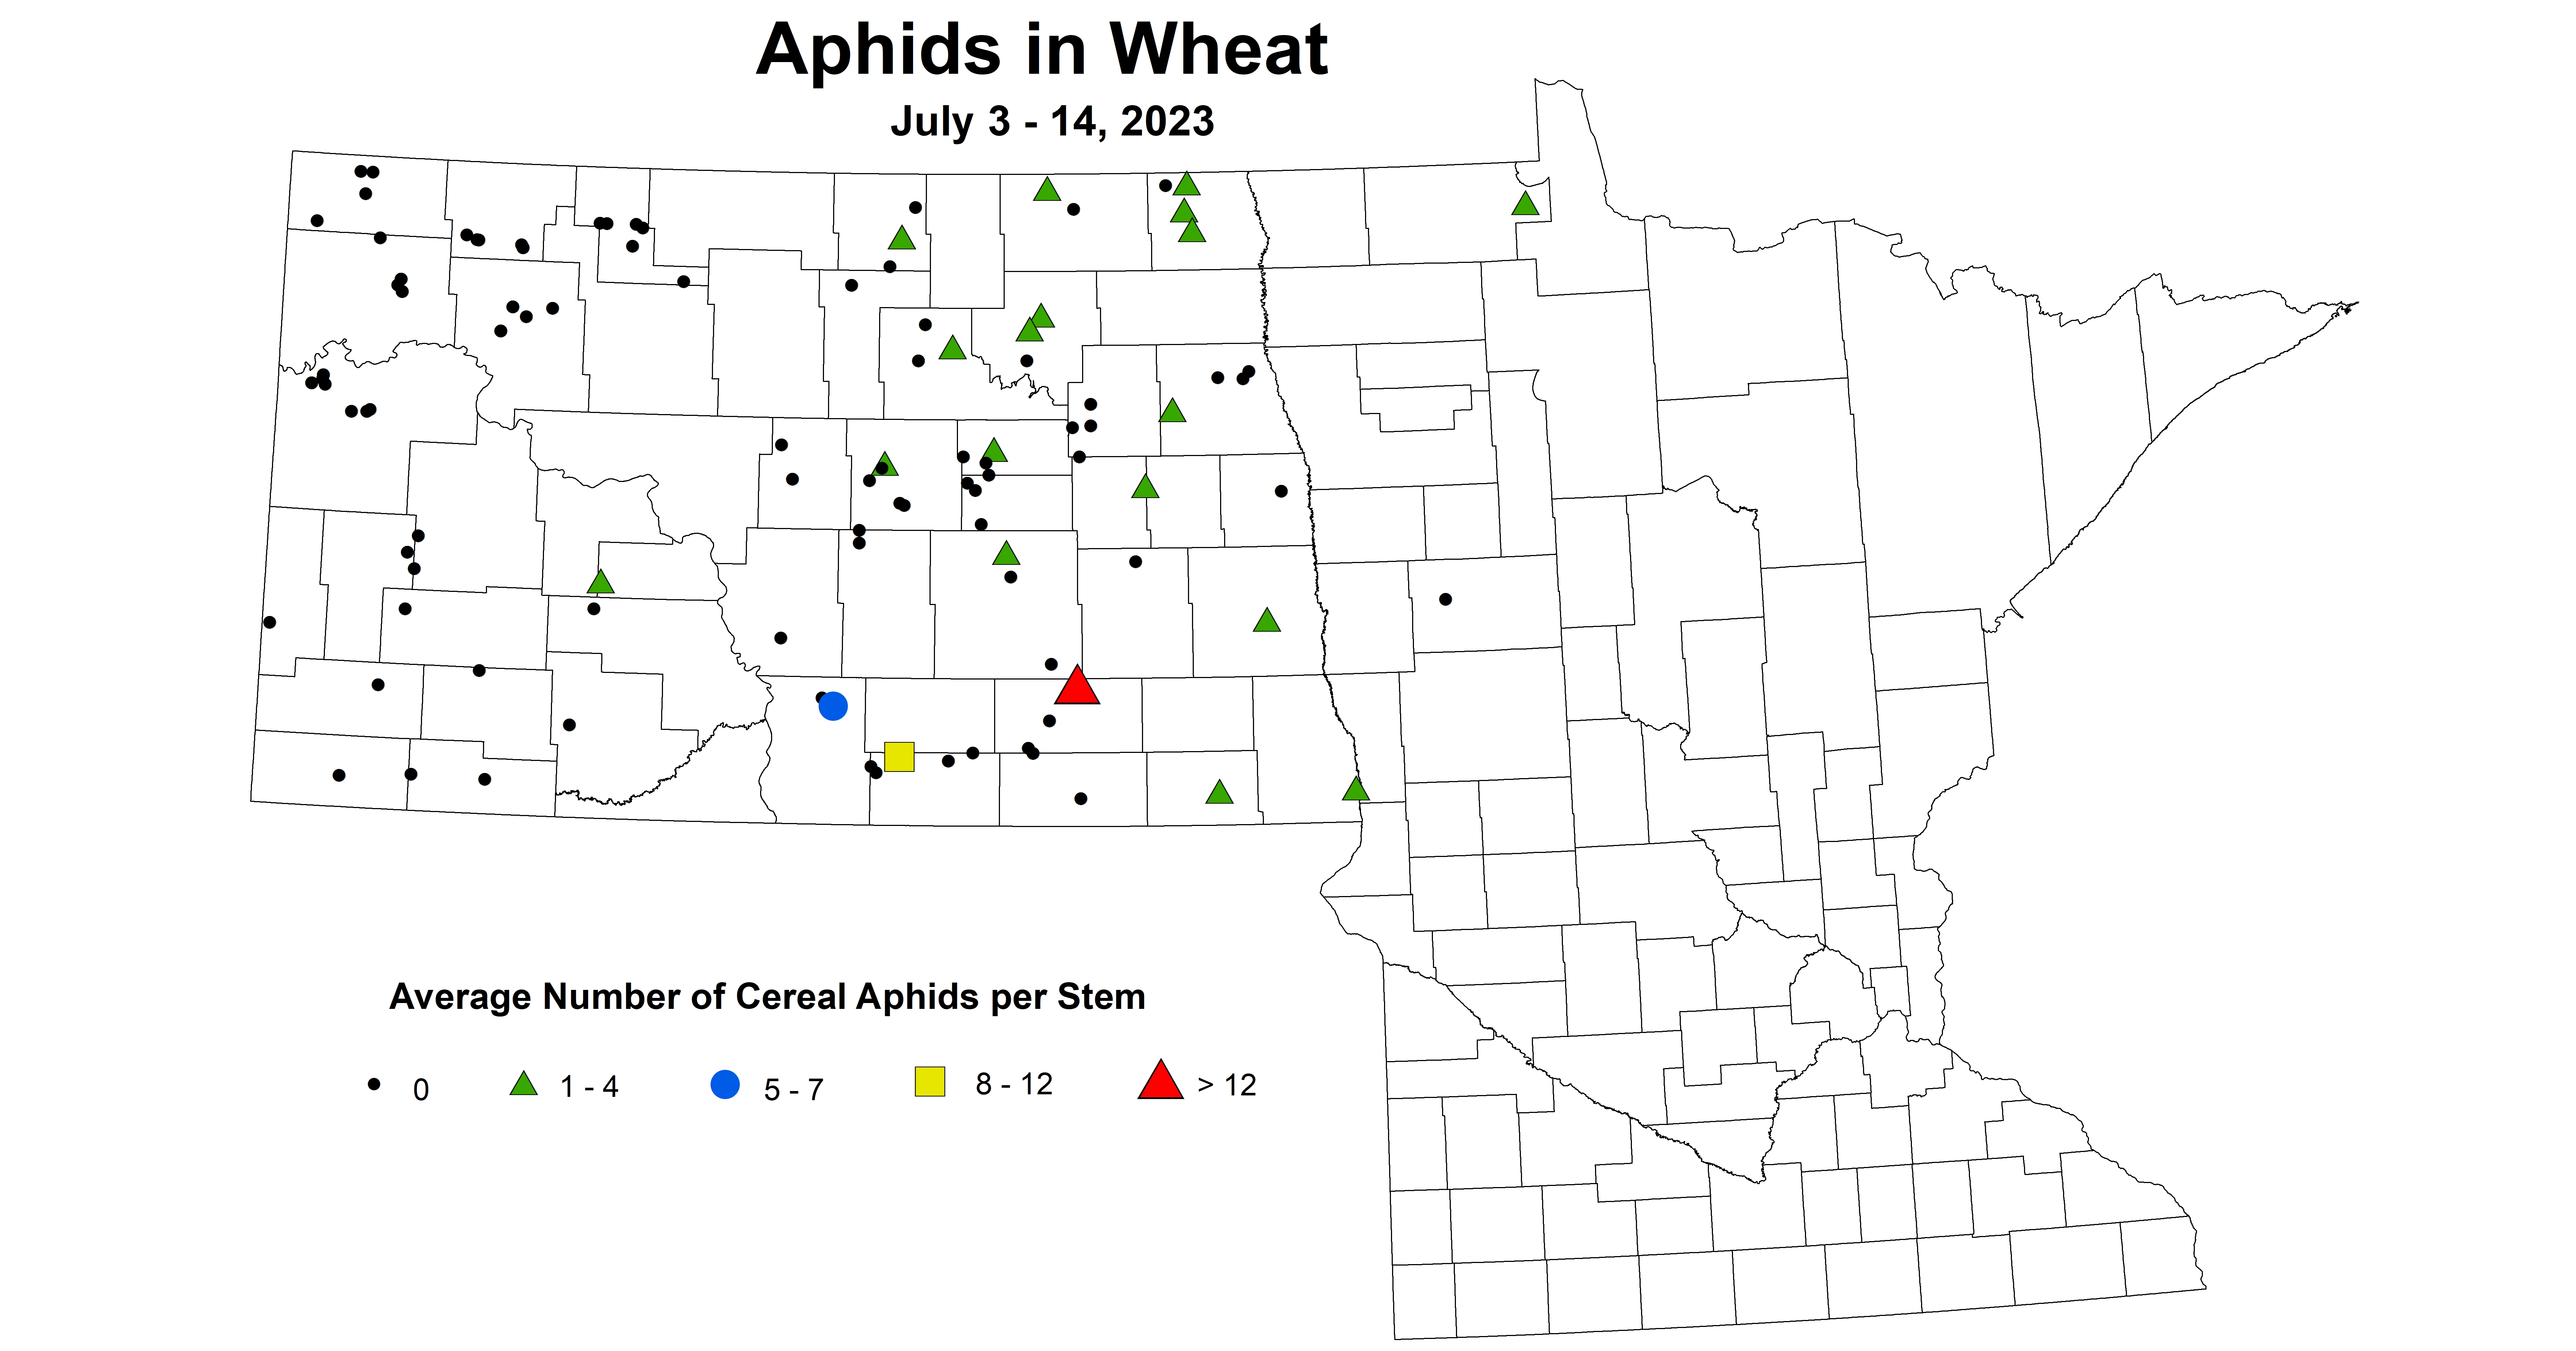 wheat aphids July 3-14 2023